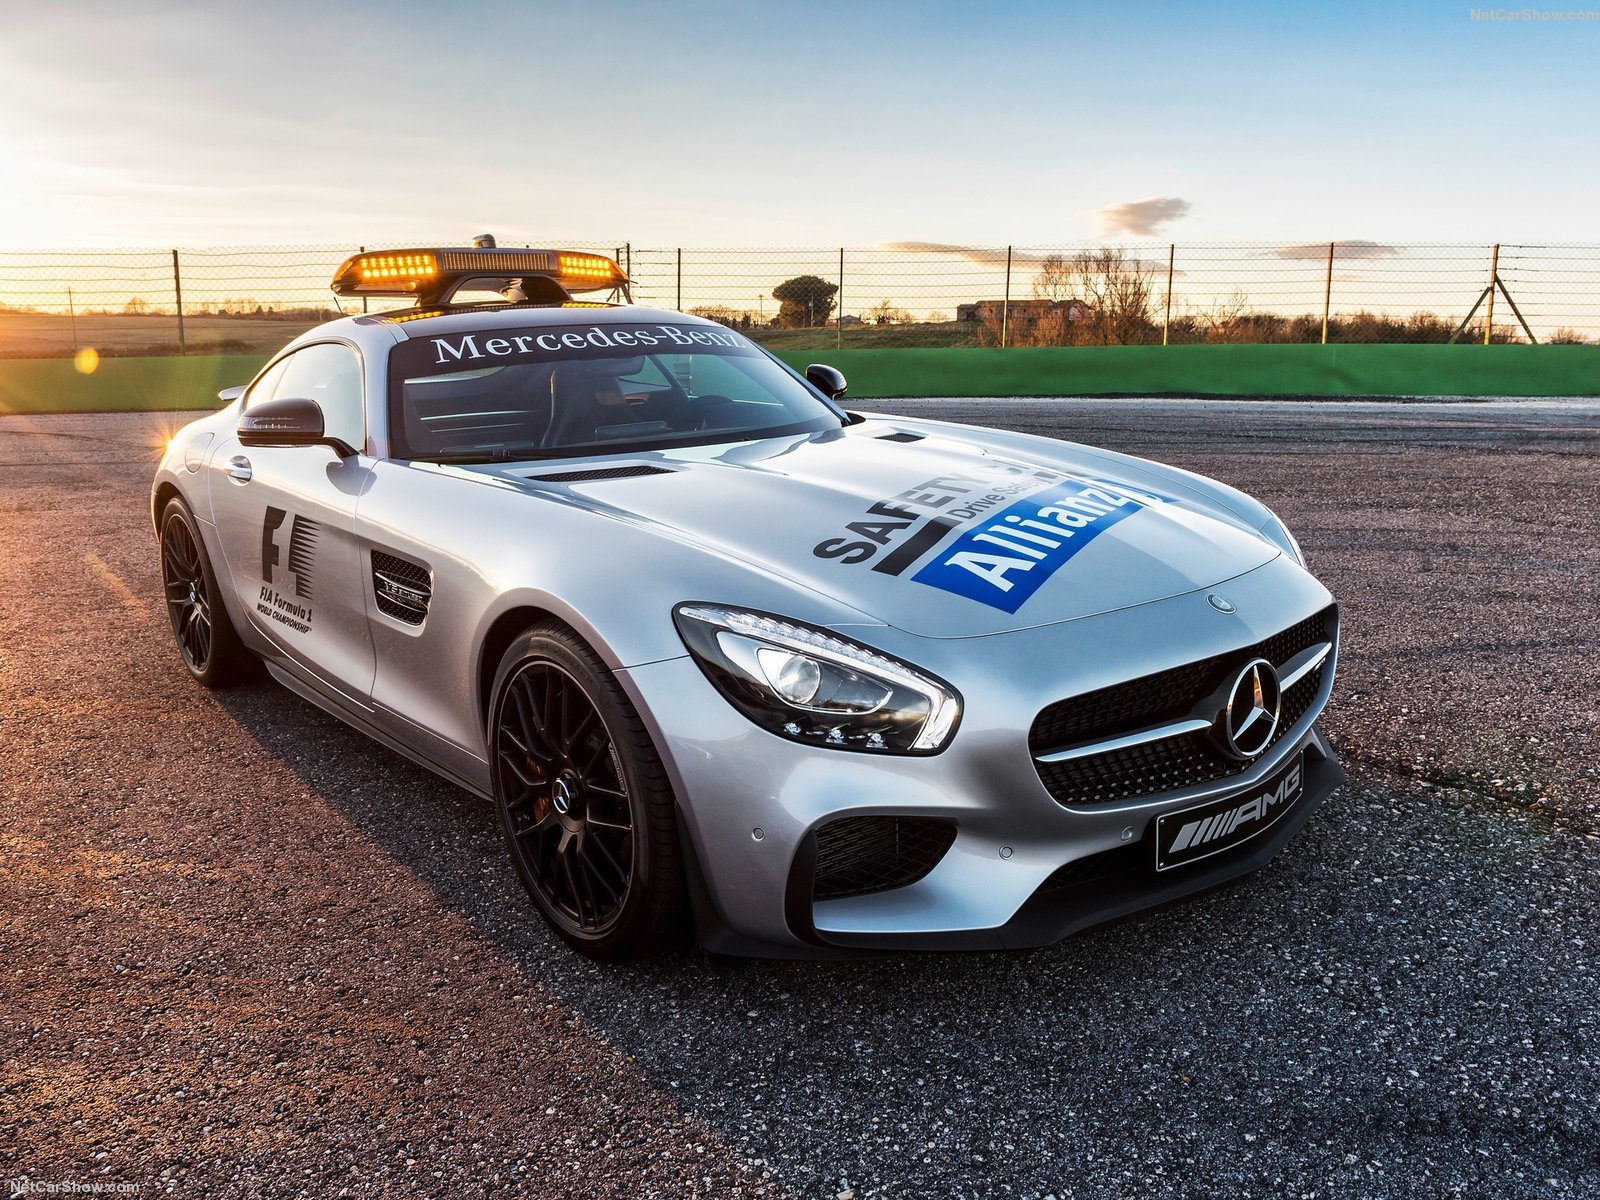 mercedes, Benz, Amg, Gt, S, Formula, One, Safety, Cars, 2015 Wallpaper